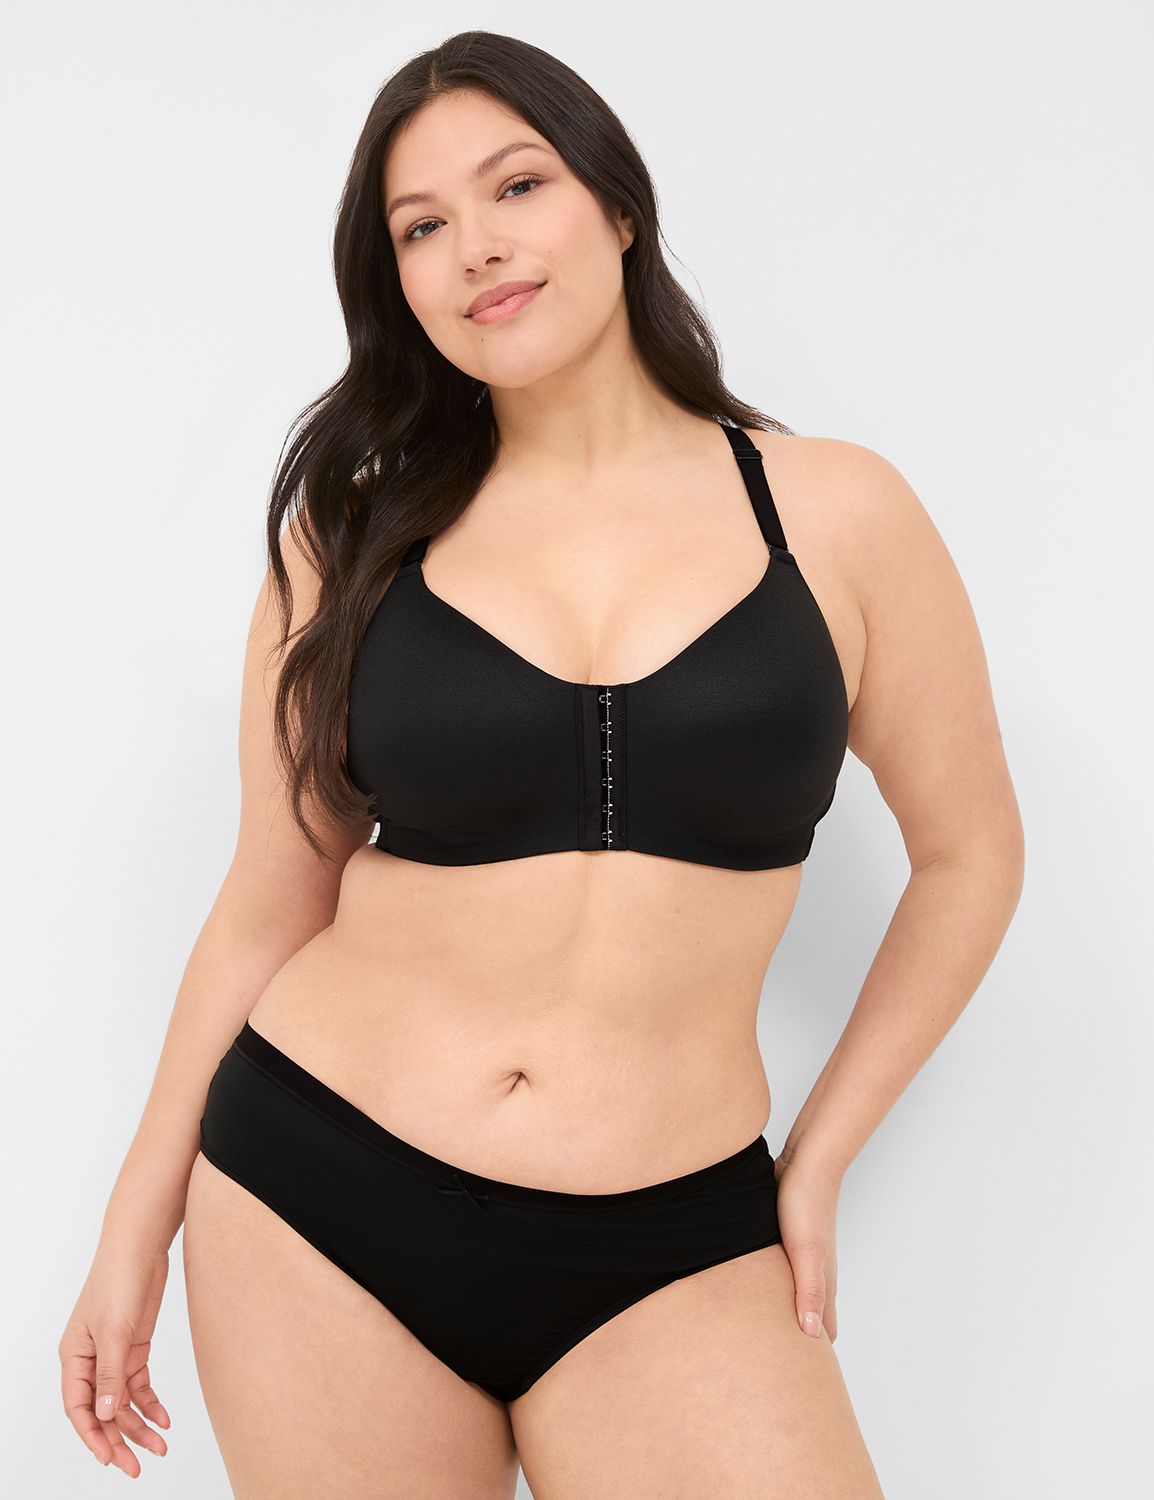 Scallop lace hipster 1131711, LaneBryant